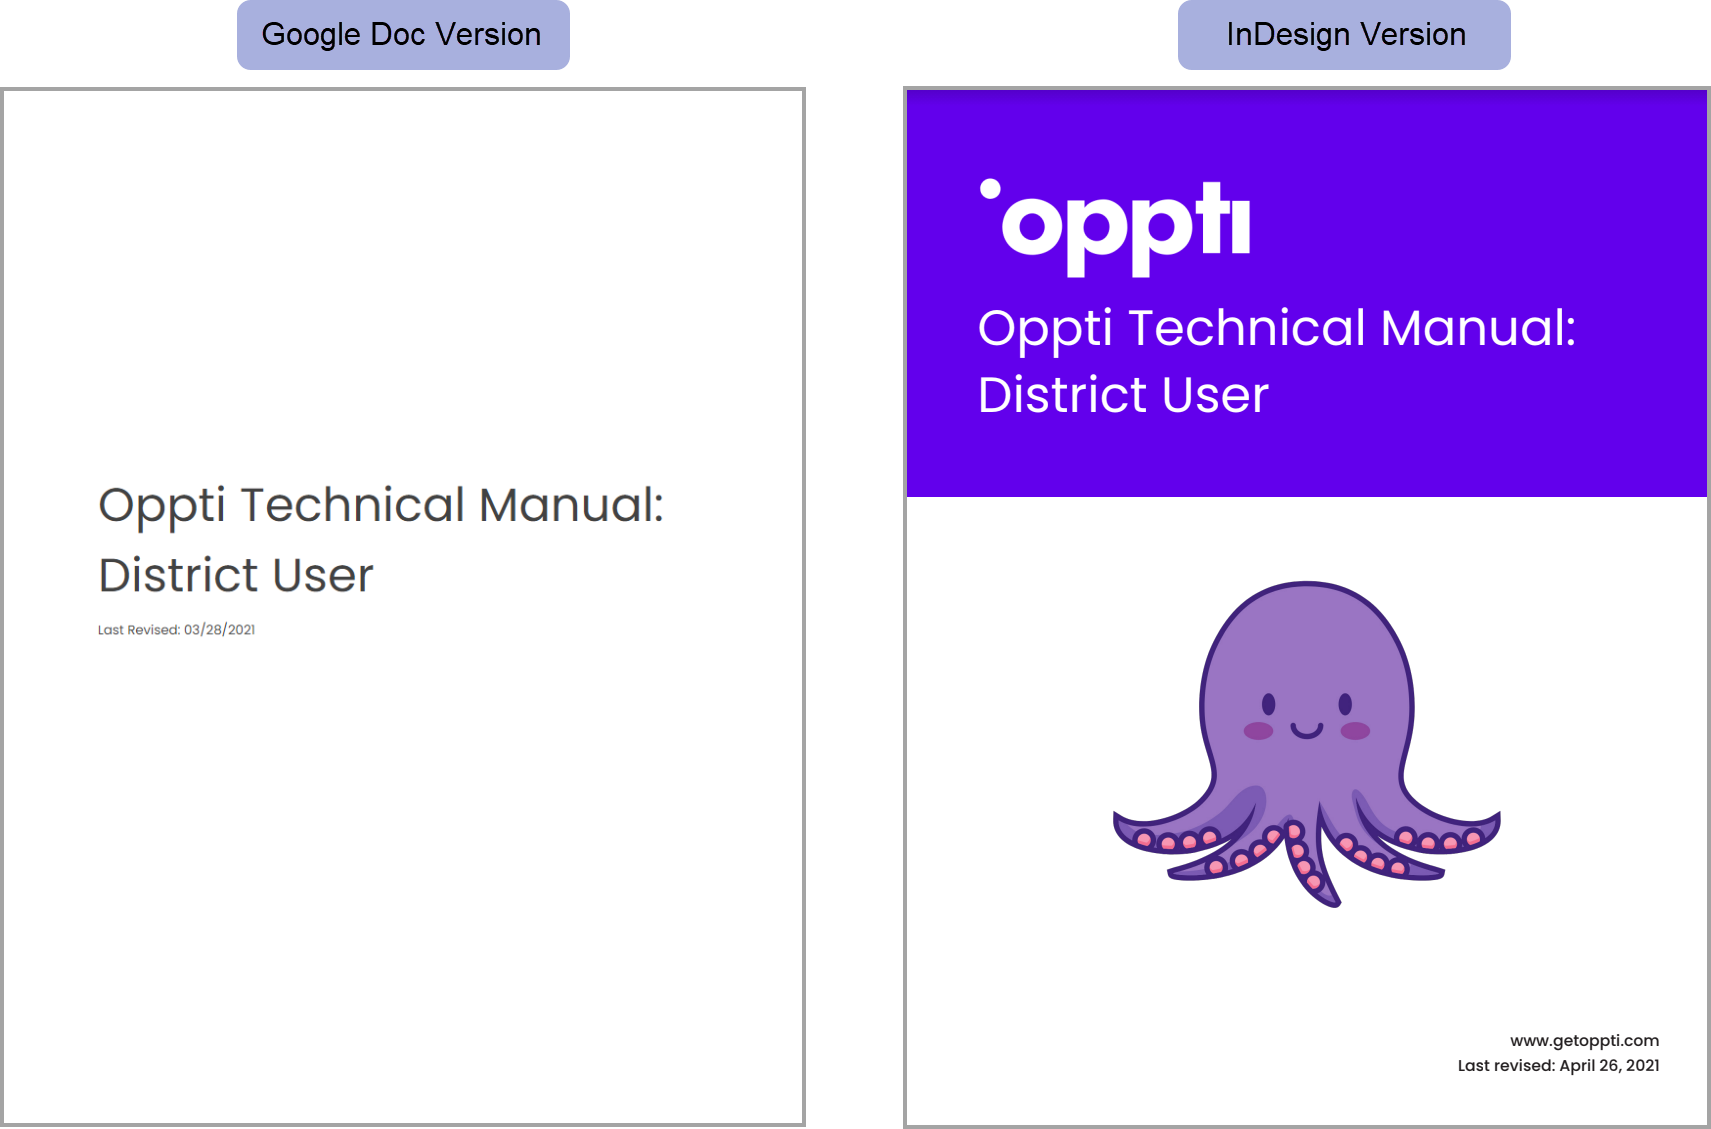 On the left: Google Doc version of the Oppti Technical Manual: District User. On the right: Adobe InDesign version of Oppti Technical Manual: District User, displaying white text on a dark purplish banner for the publication title and a large purple, smiling octopus cartoon on cover.